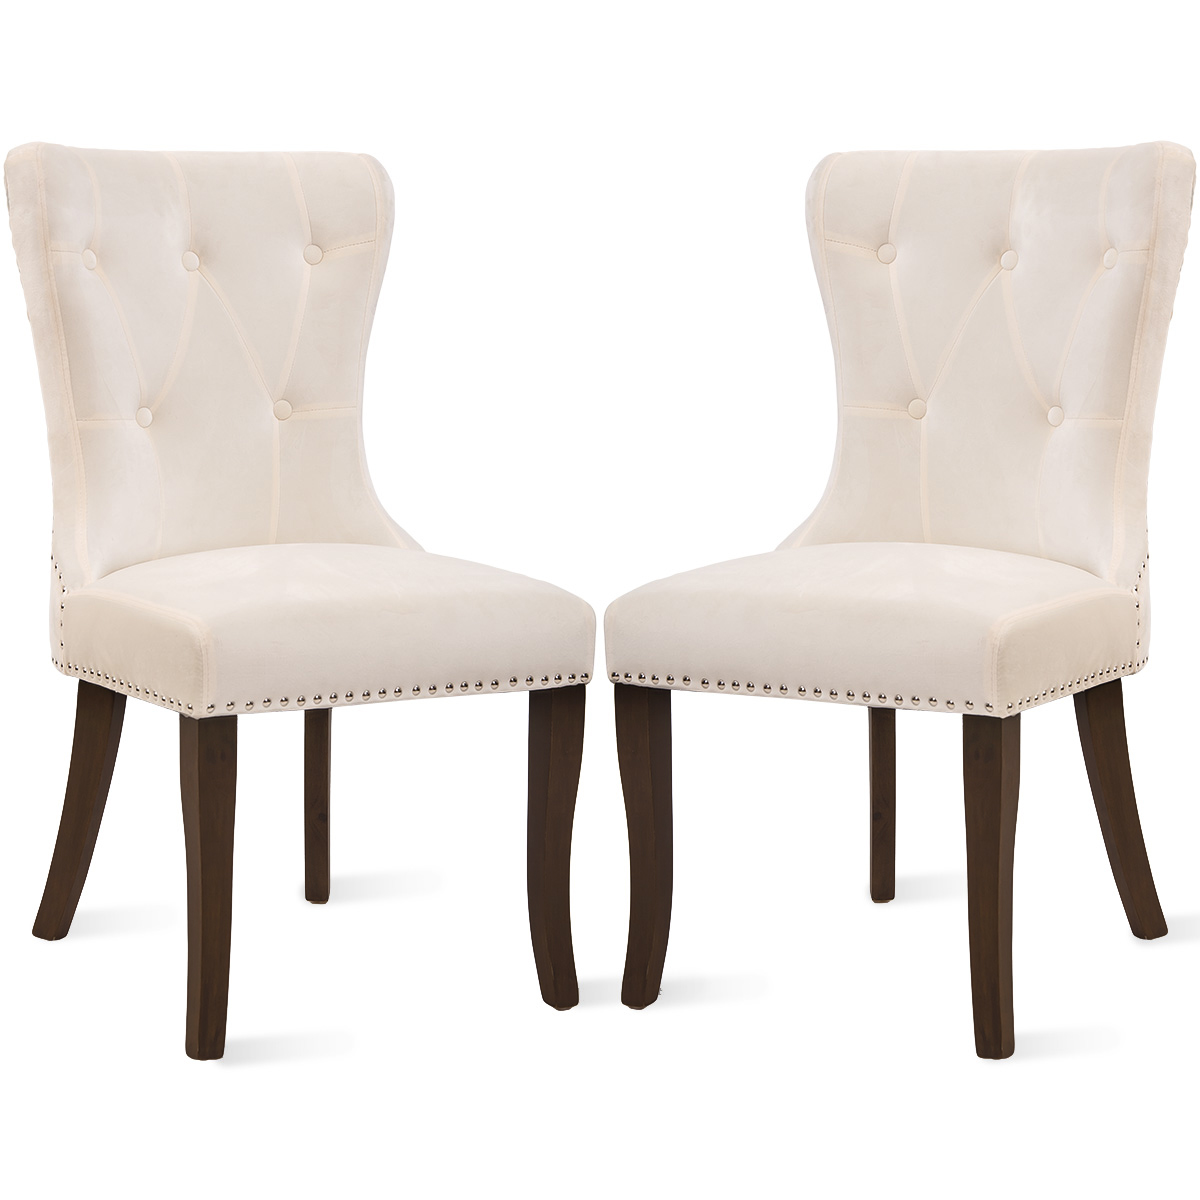 Dining Chair Tufted Armless Chair Upholstered Accent Chair,Set of 2 (Cream)-Boyel Living